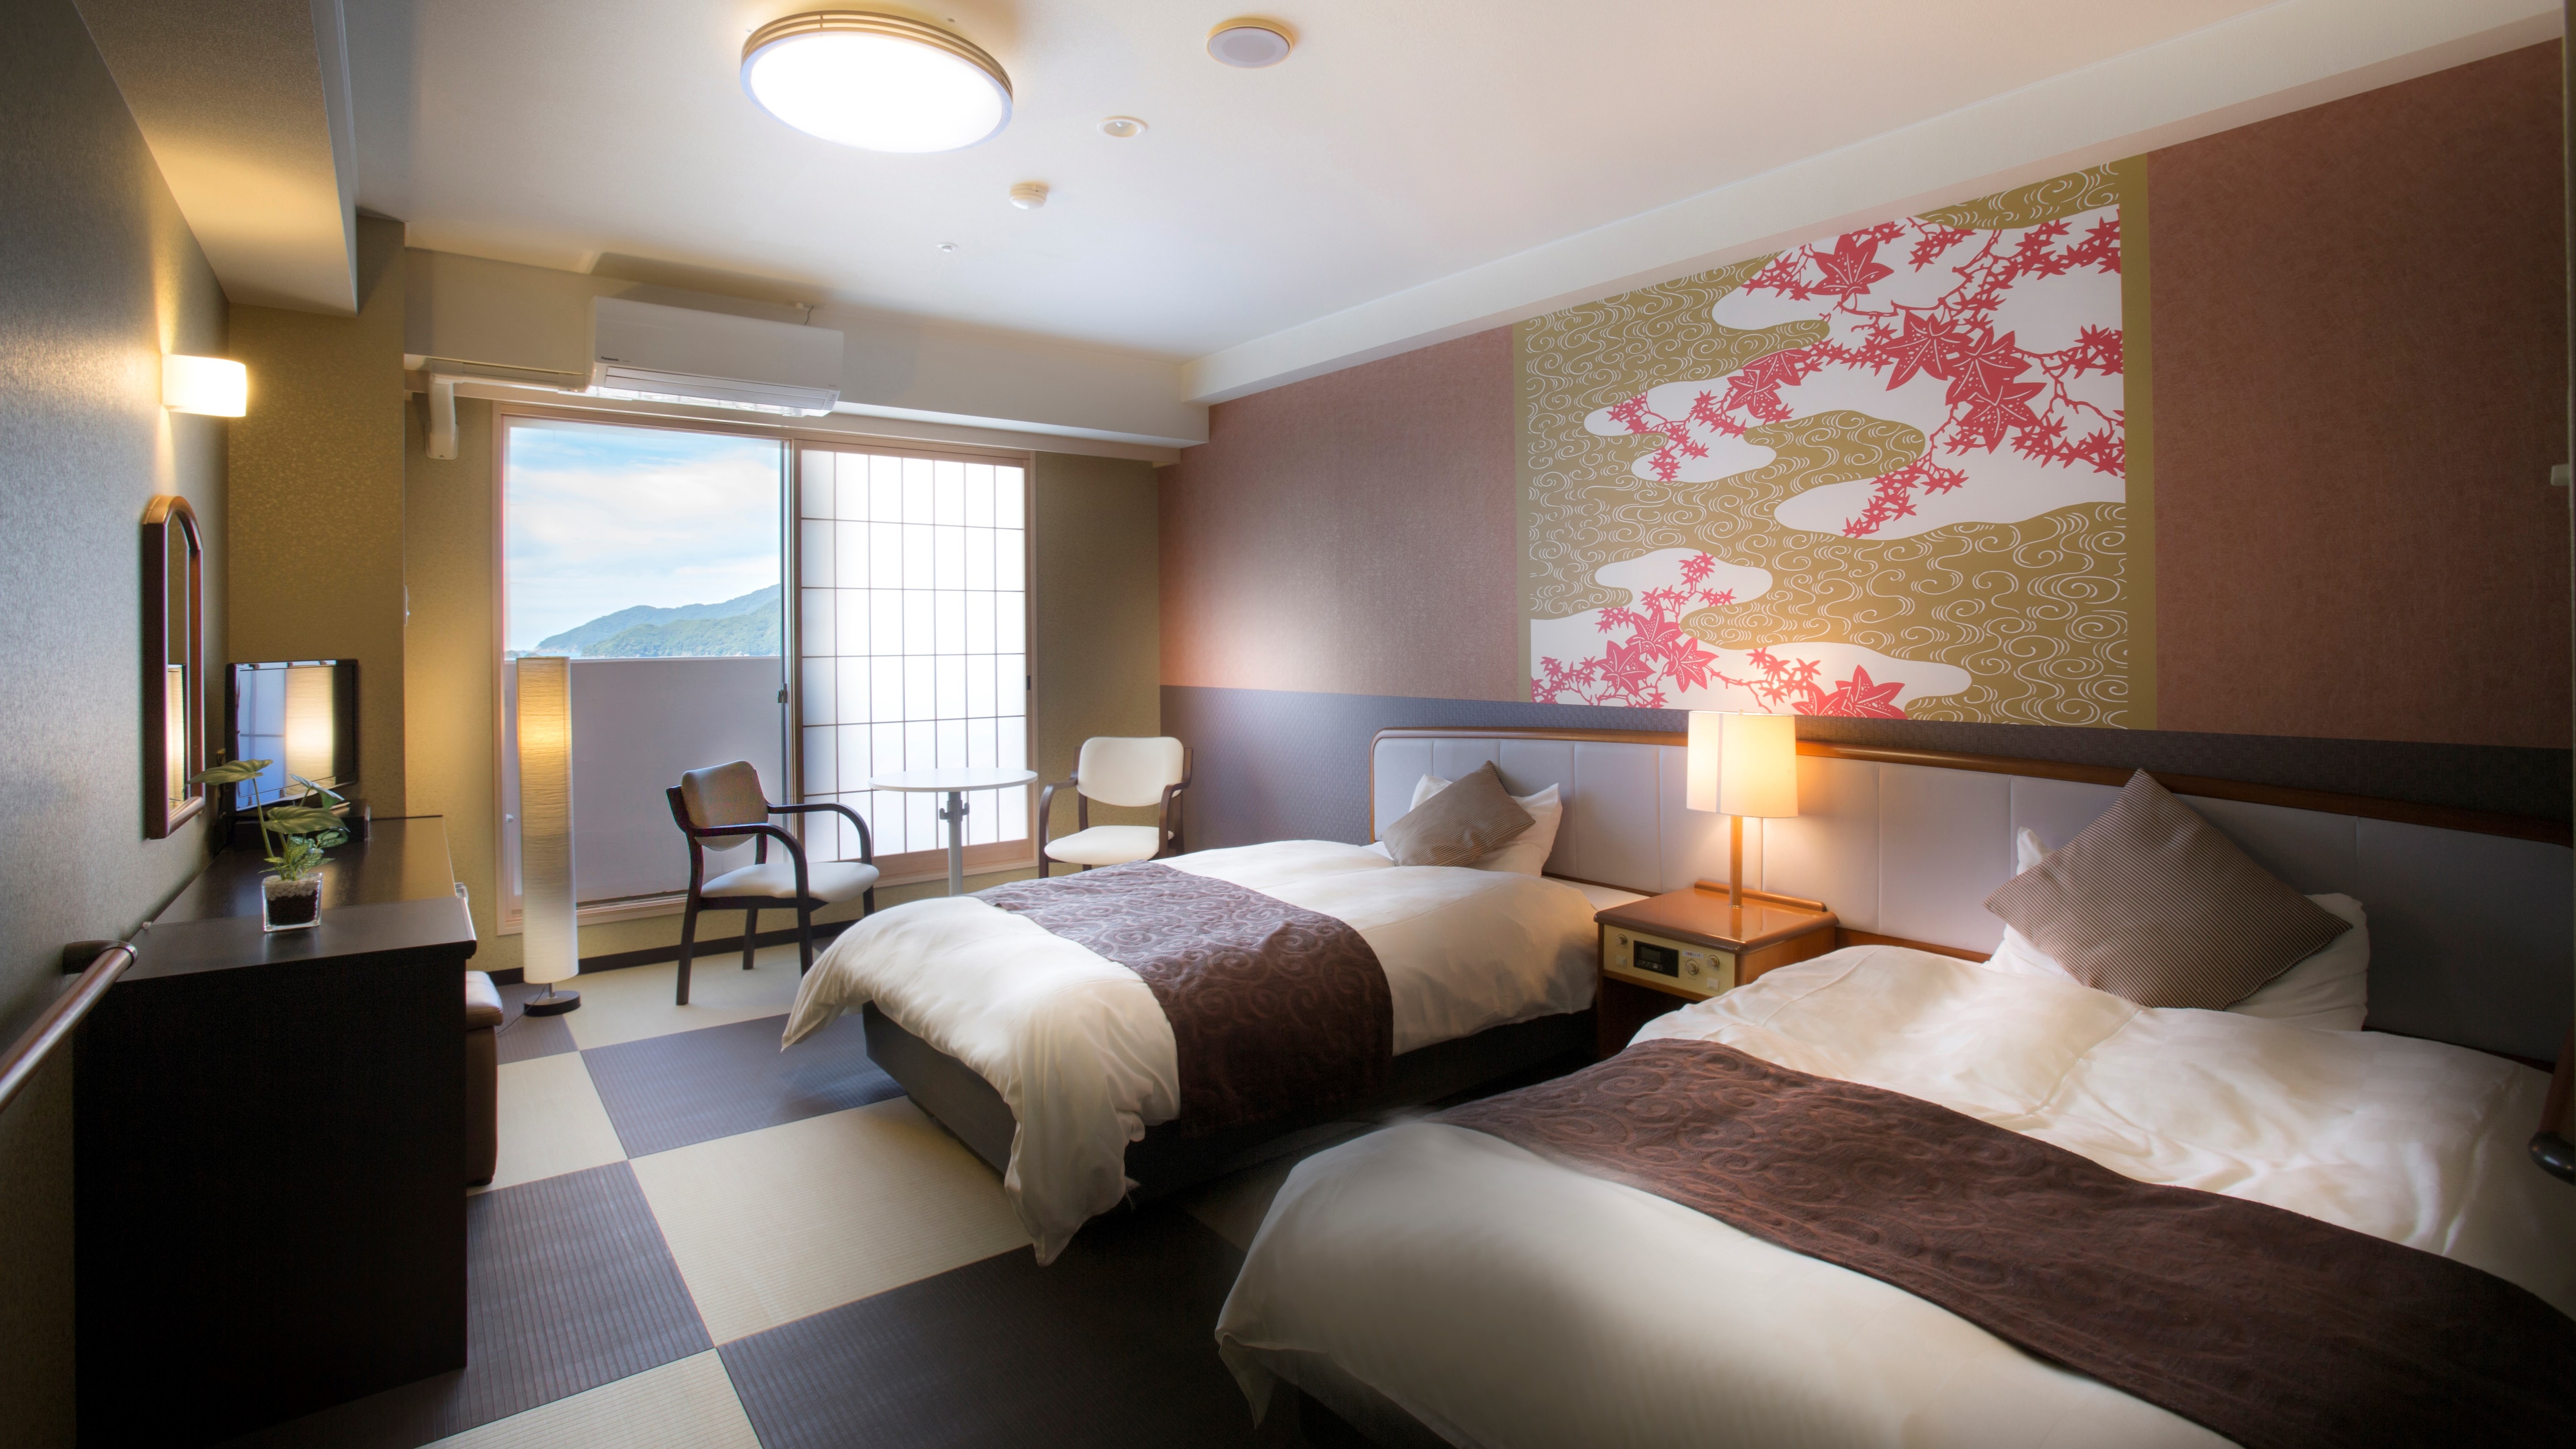 Renewal Japanese modern twin room example (autumn leaves)